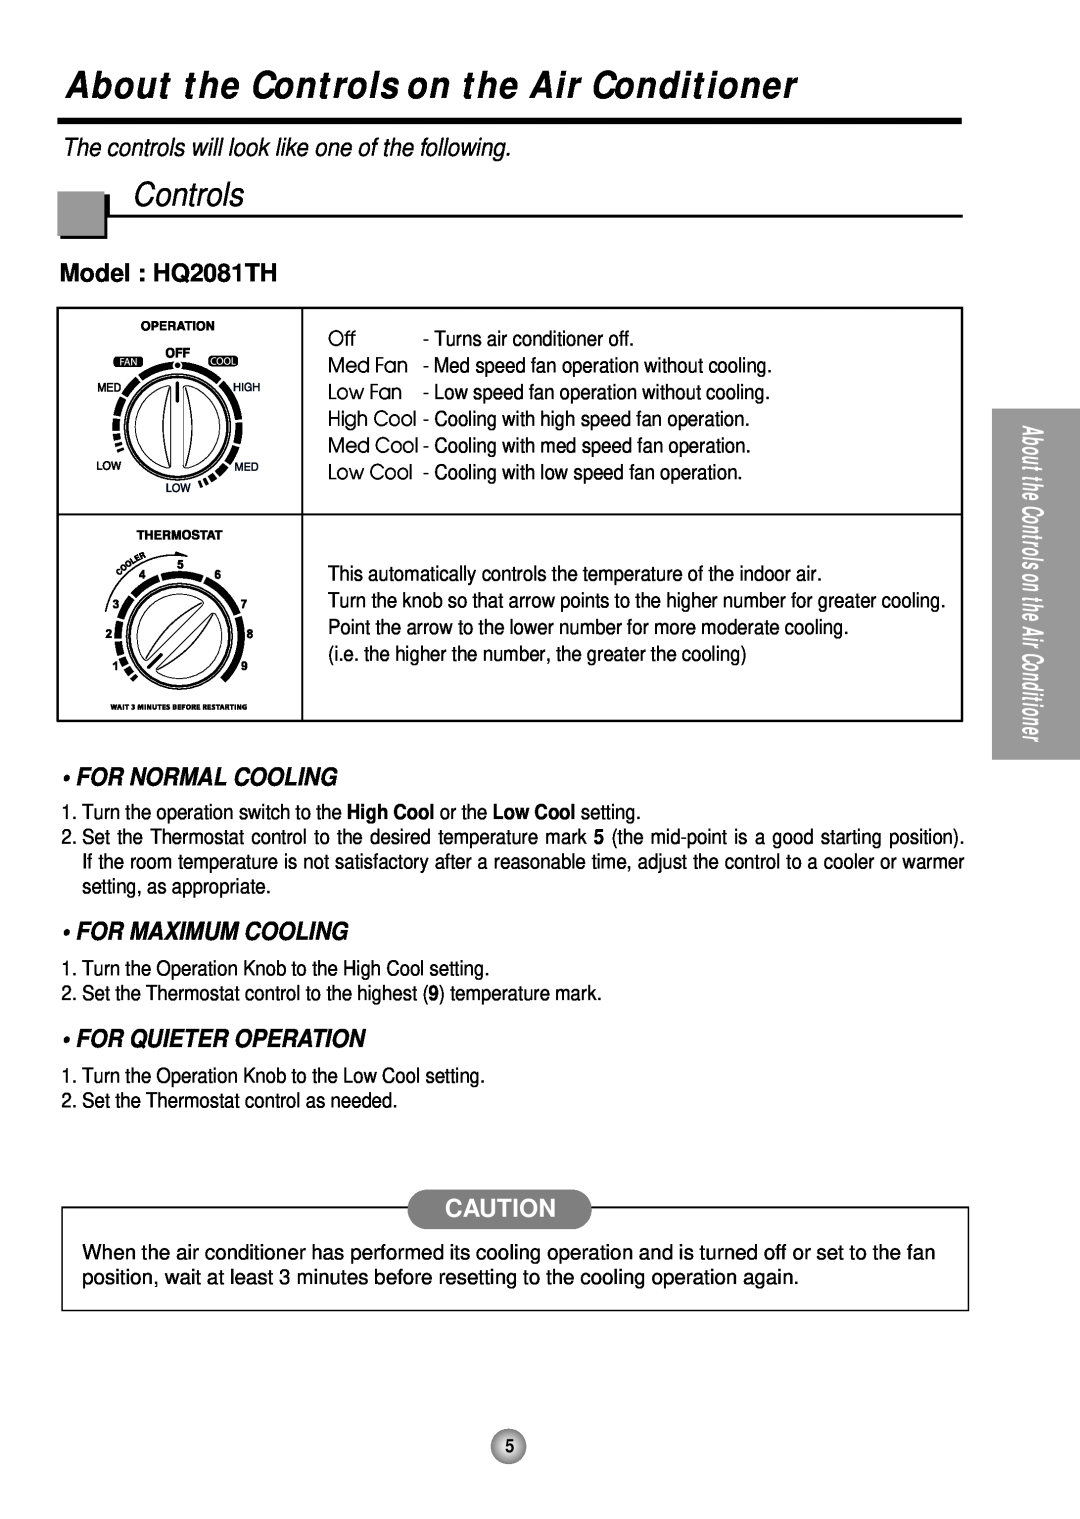 Quasar HQ-2081TH manual About the Controls on the Air Conditioner, The controls will look like one of the following 